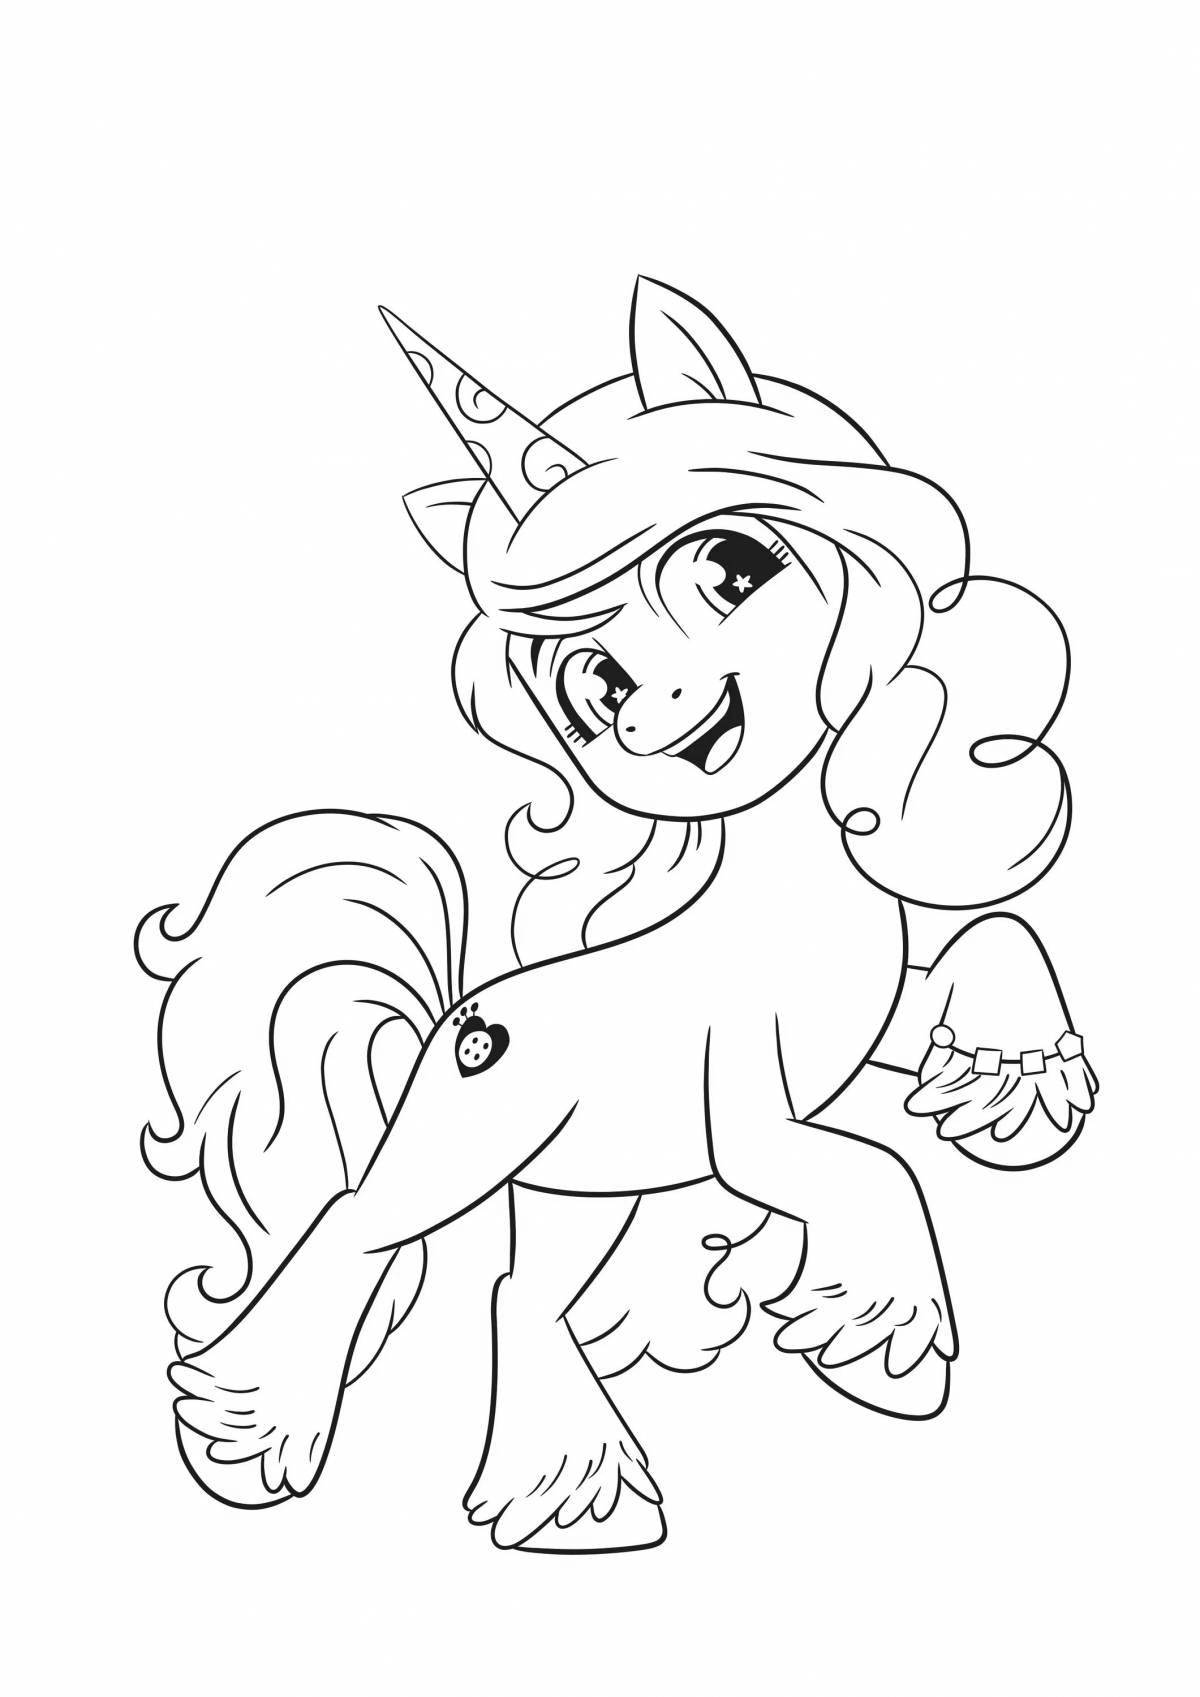 Colored pony sleigh coloring page